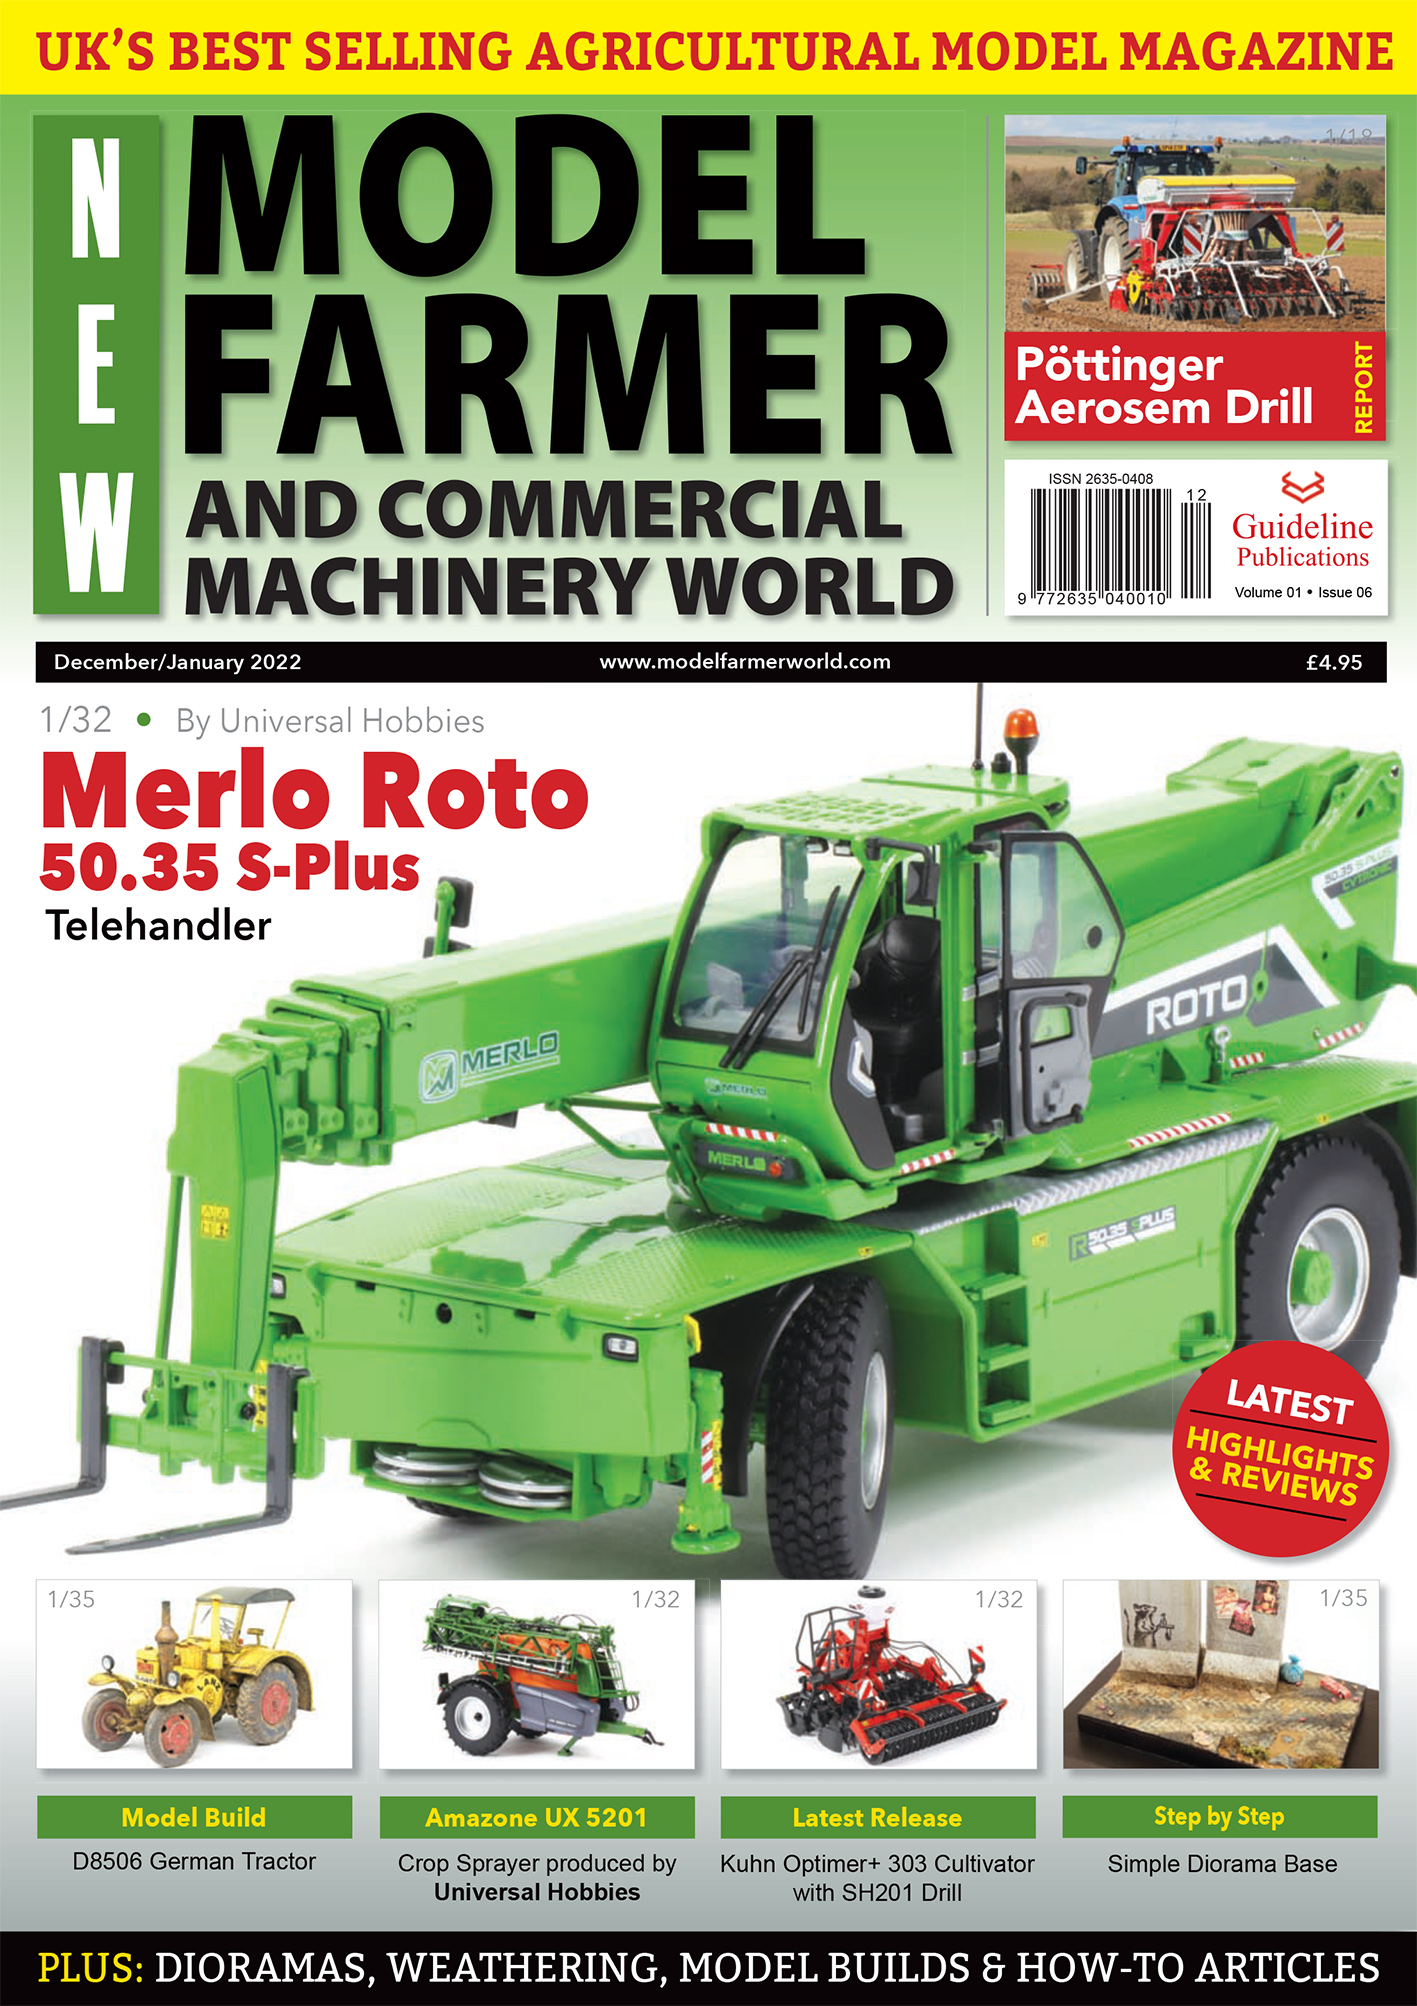 Guideline Publications New Model Farmer  -  Vol 01 - Issue 06 On sale NOW Issue 6 